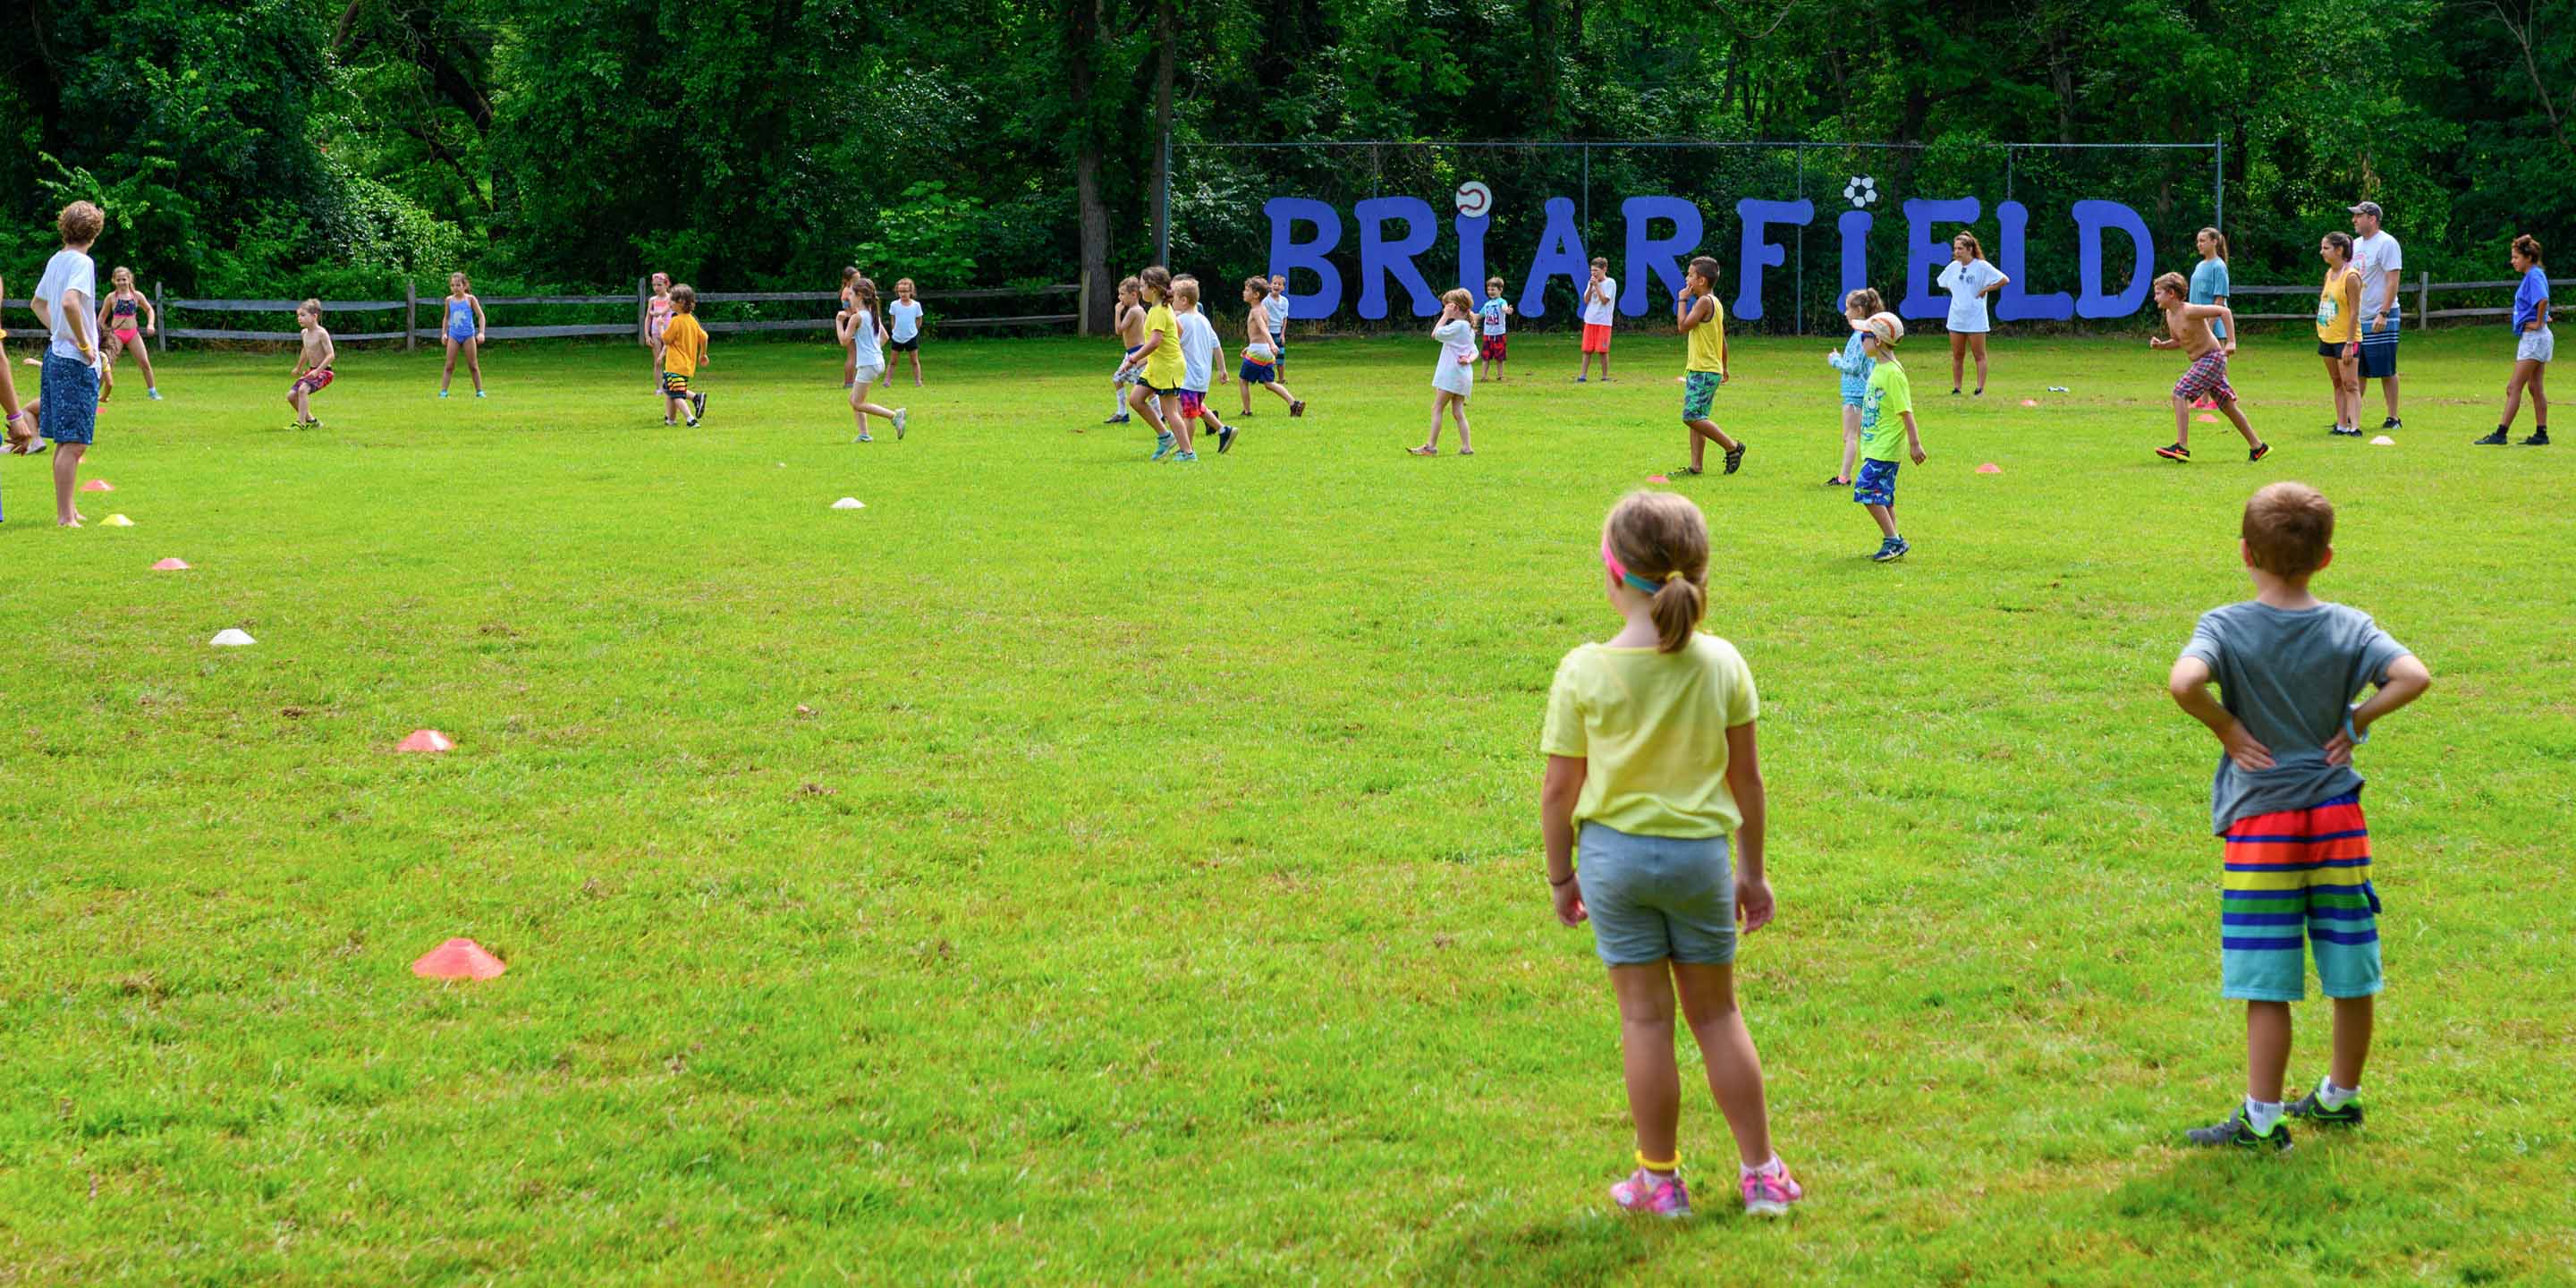 Young campers playing a game on the Briarfield